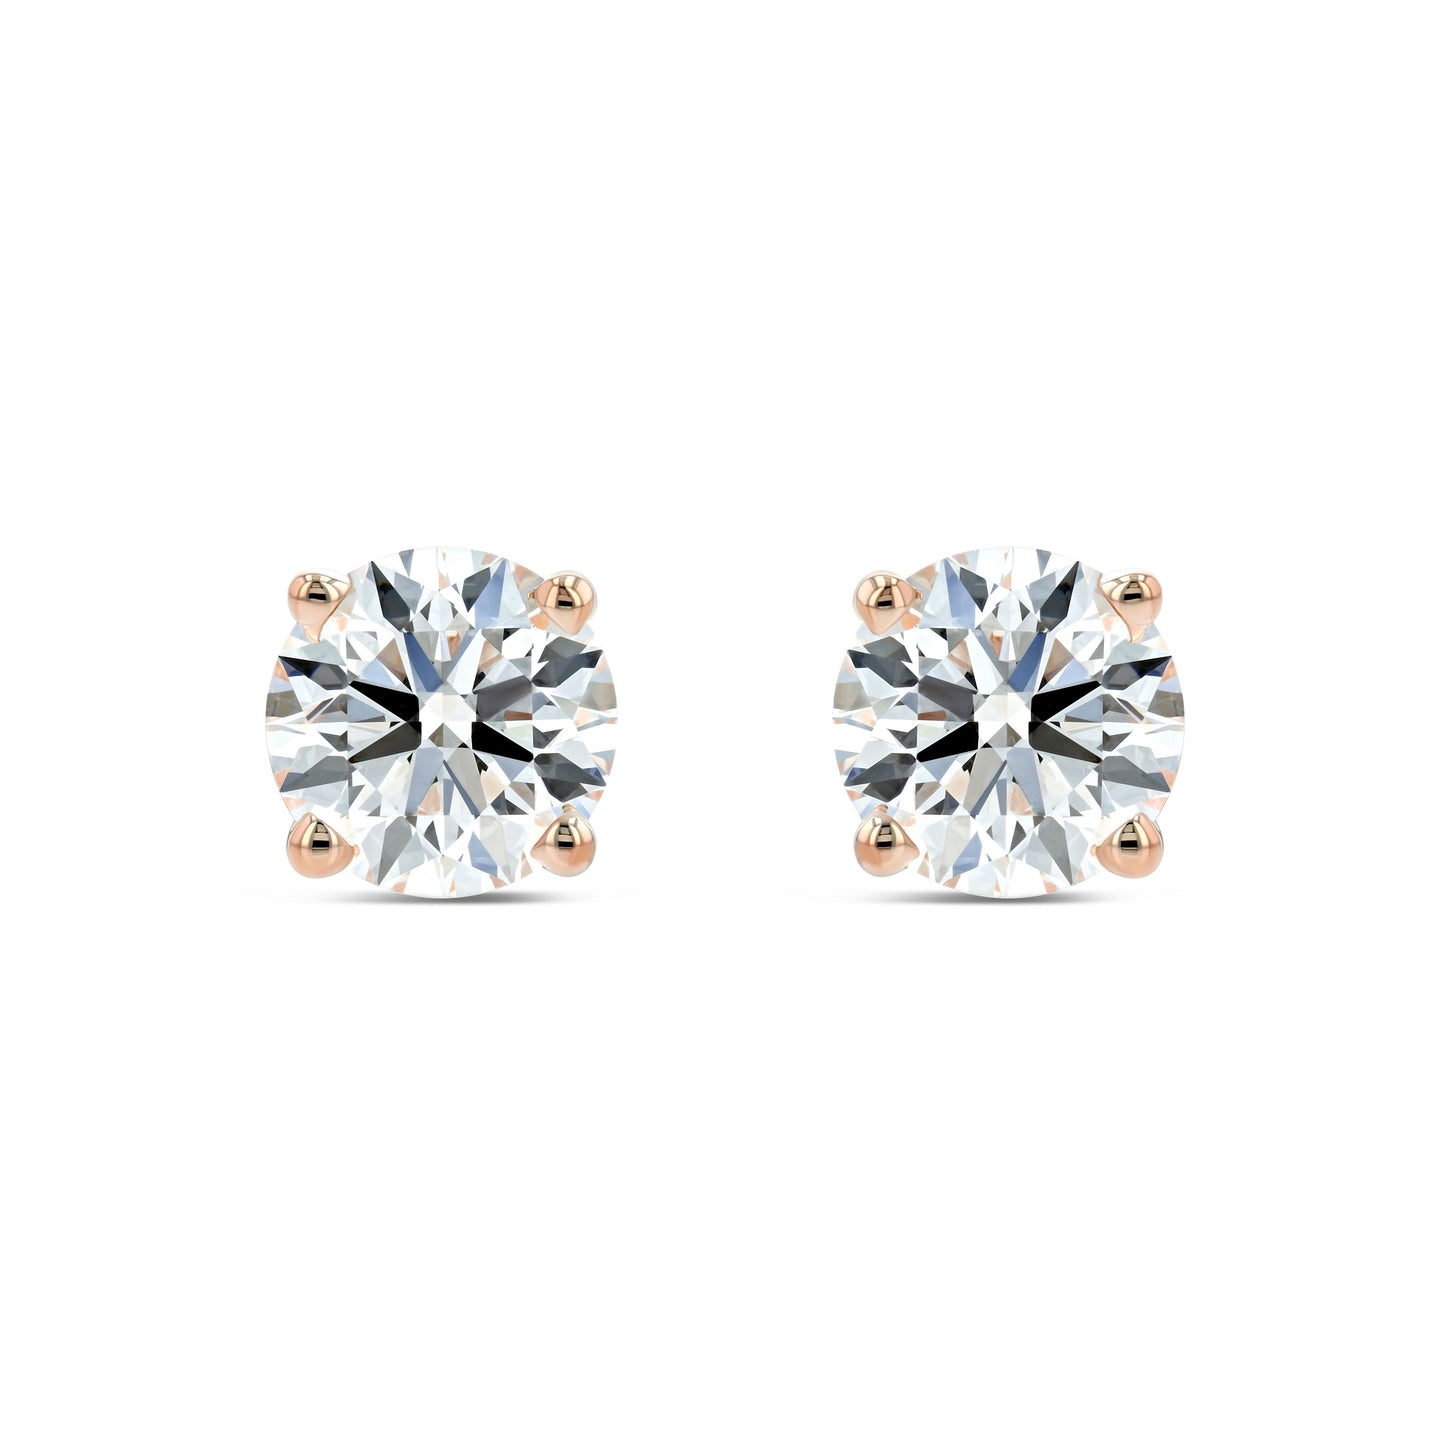 14k Rose Gold 4-prong Round Diamond Stud Earrings 1/2ctw (4.0mm Ea), M-n Color, Si2-si3 Clarity